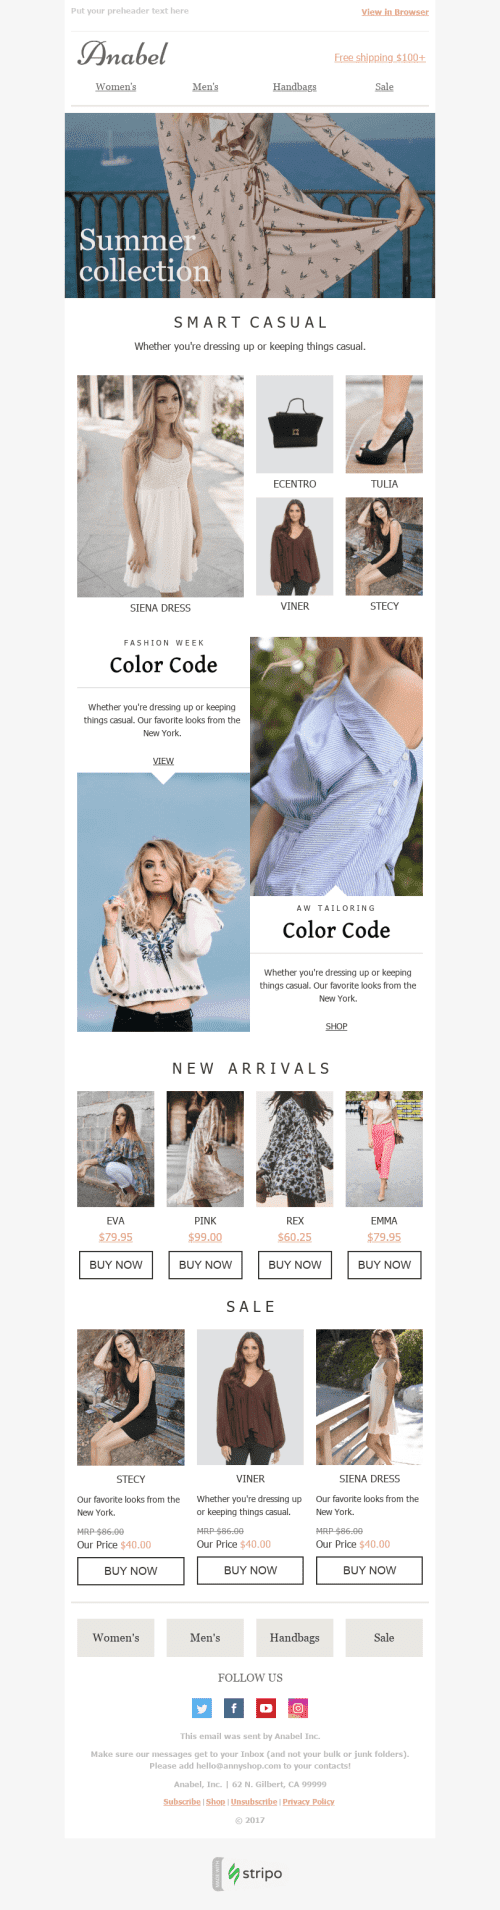 Promo Email Template "Bright Colors" for Fashion industry desktop view